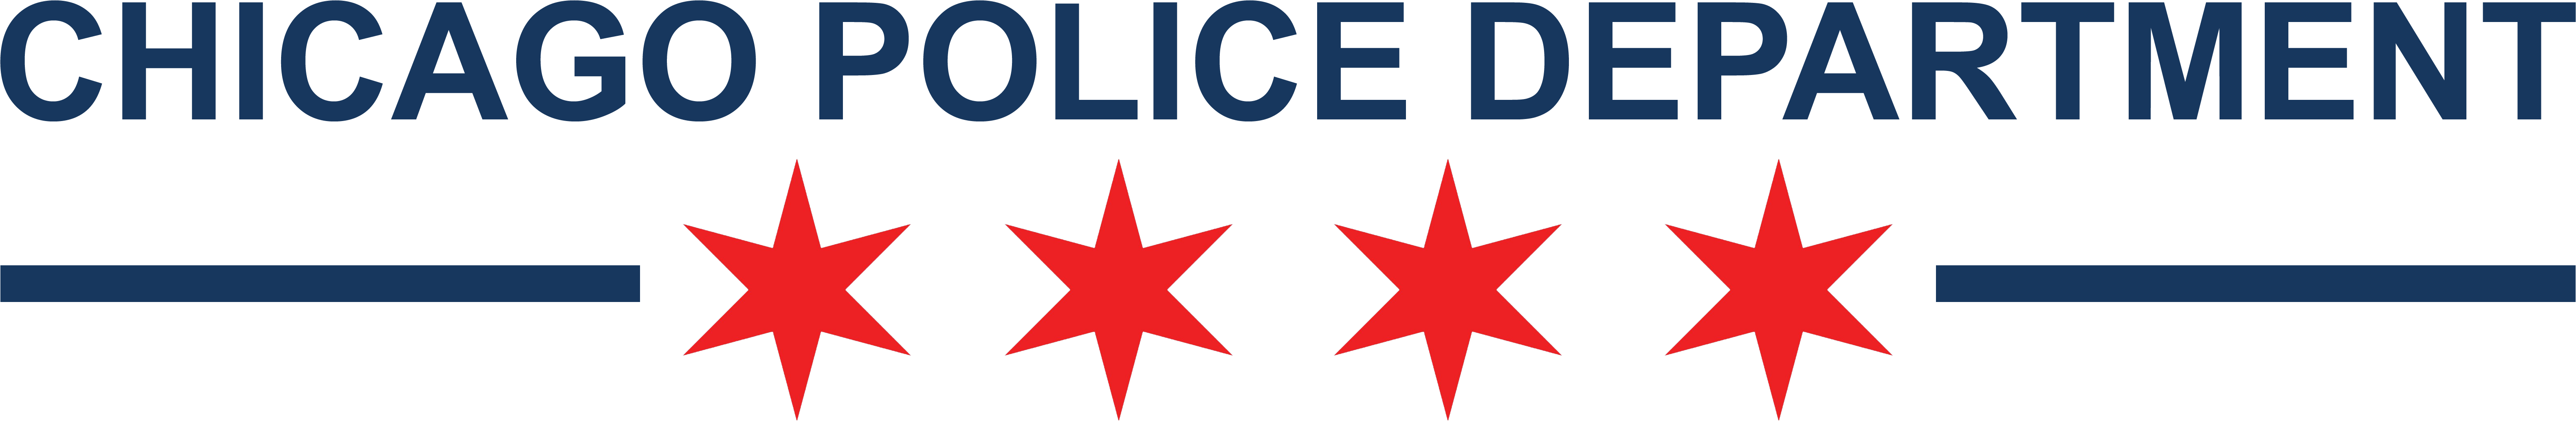 police database lookup